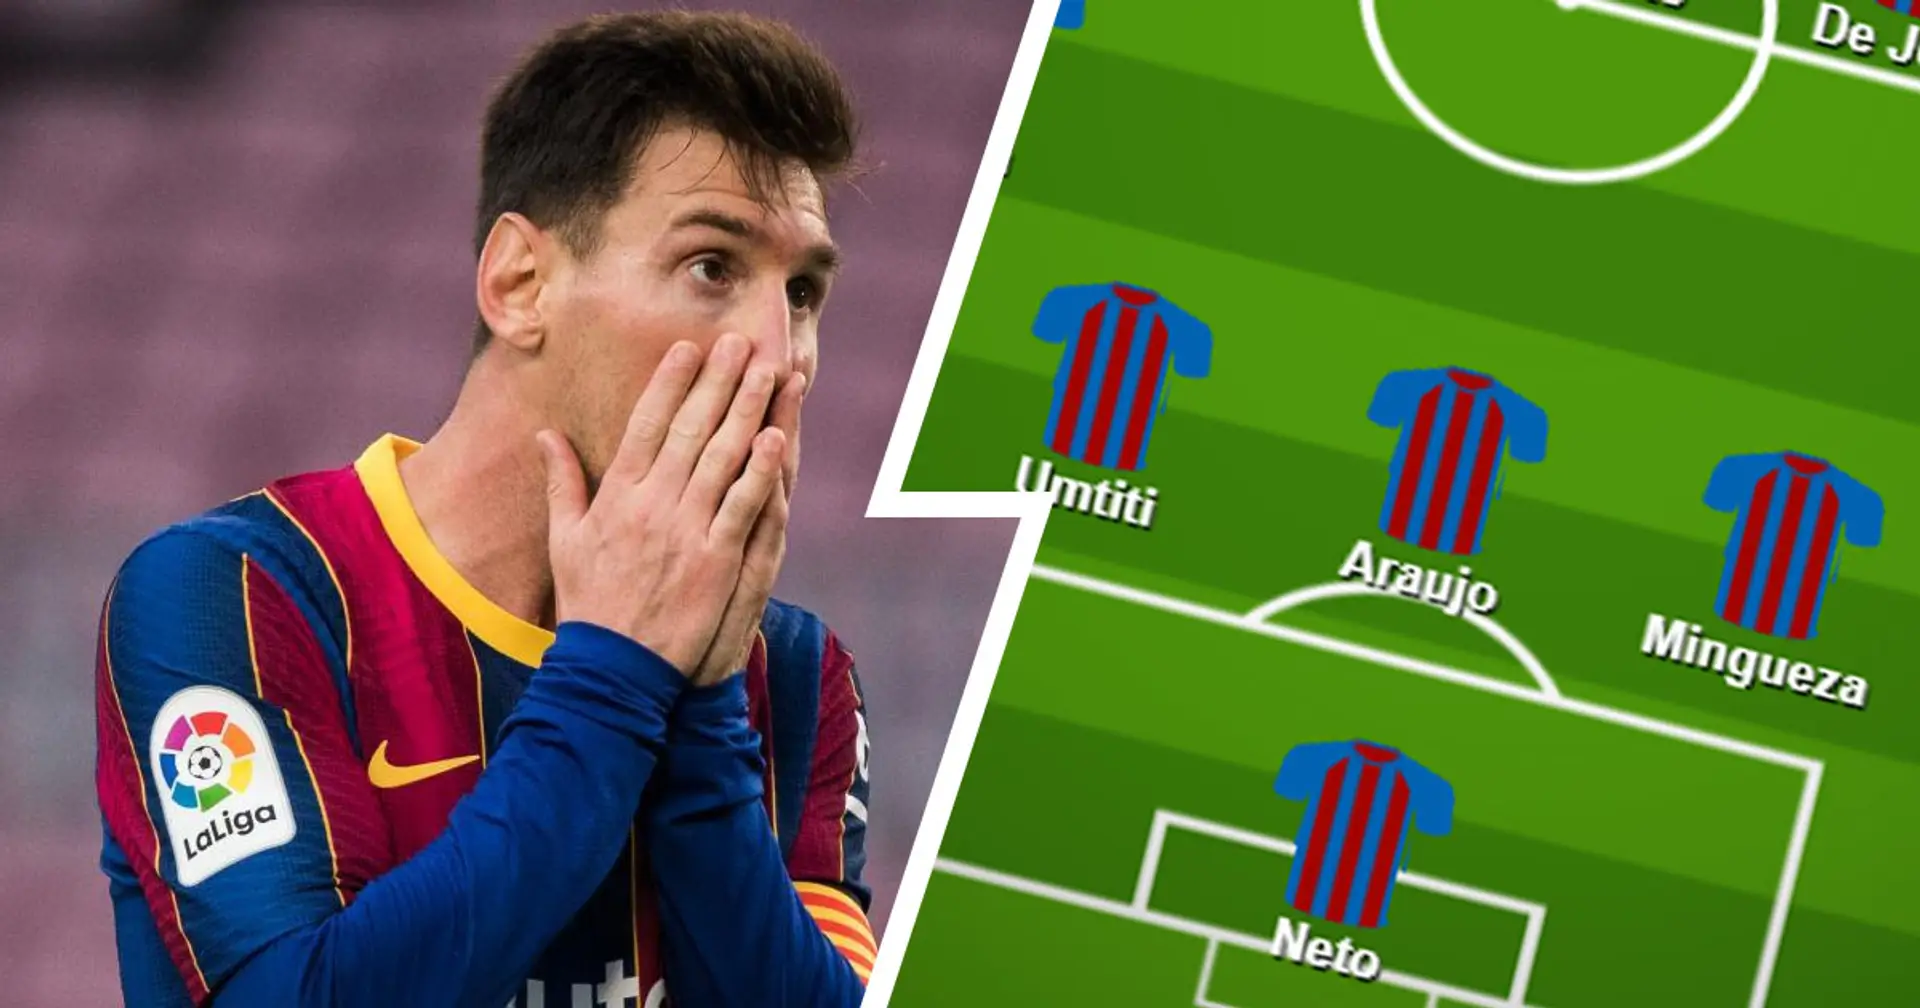 Pique out, Mingueza in: How Barcelona might line up against Eibar based on Celta loss